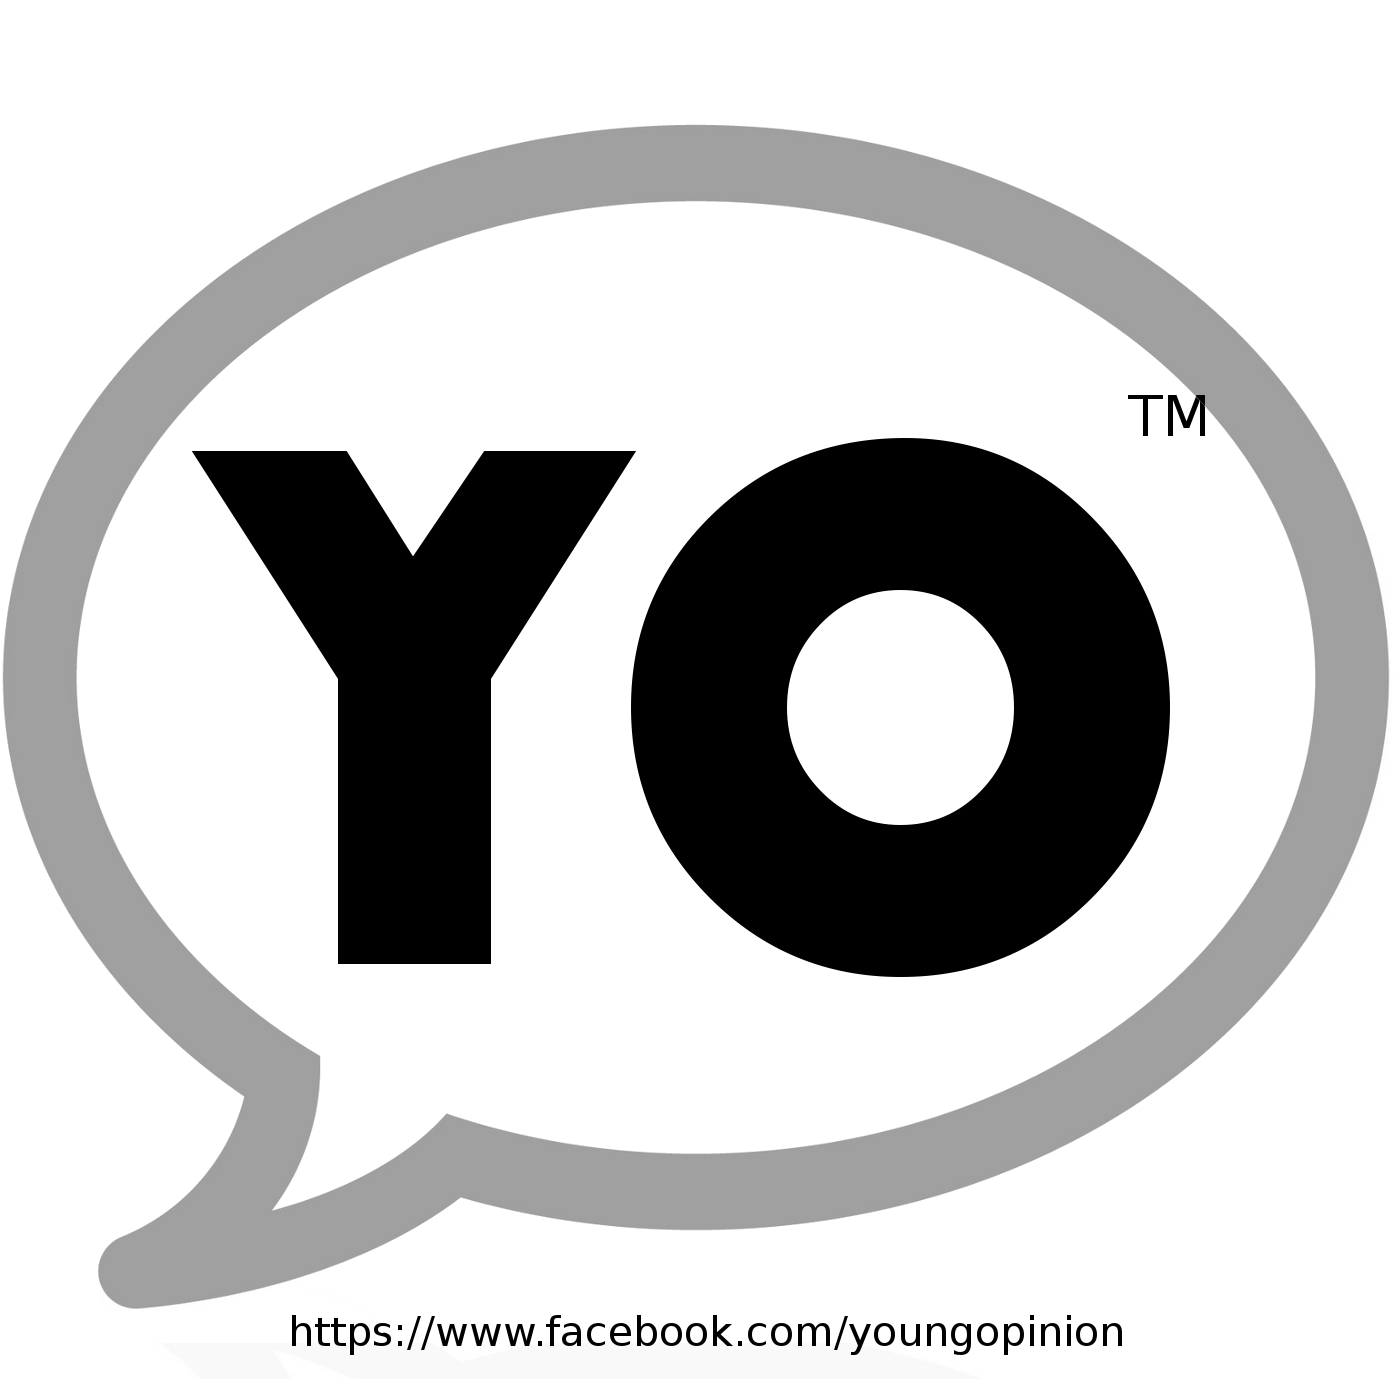 Episode 1 - Introduction To YO Podcast